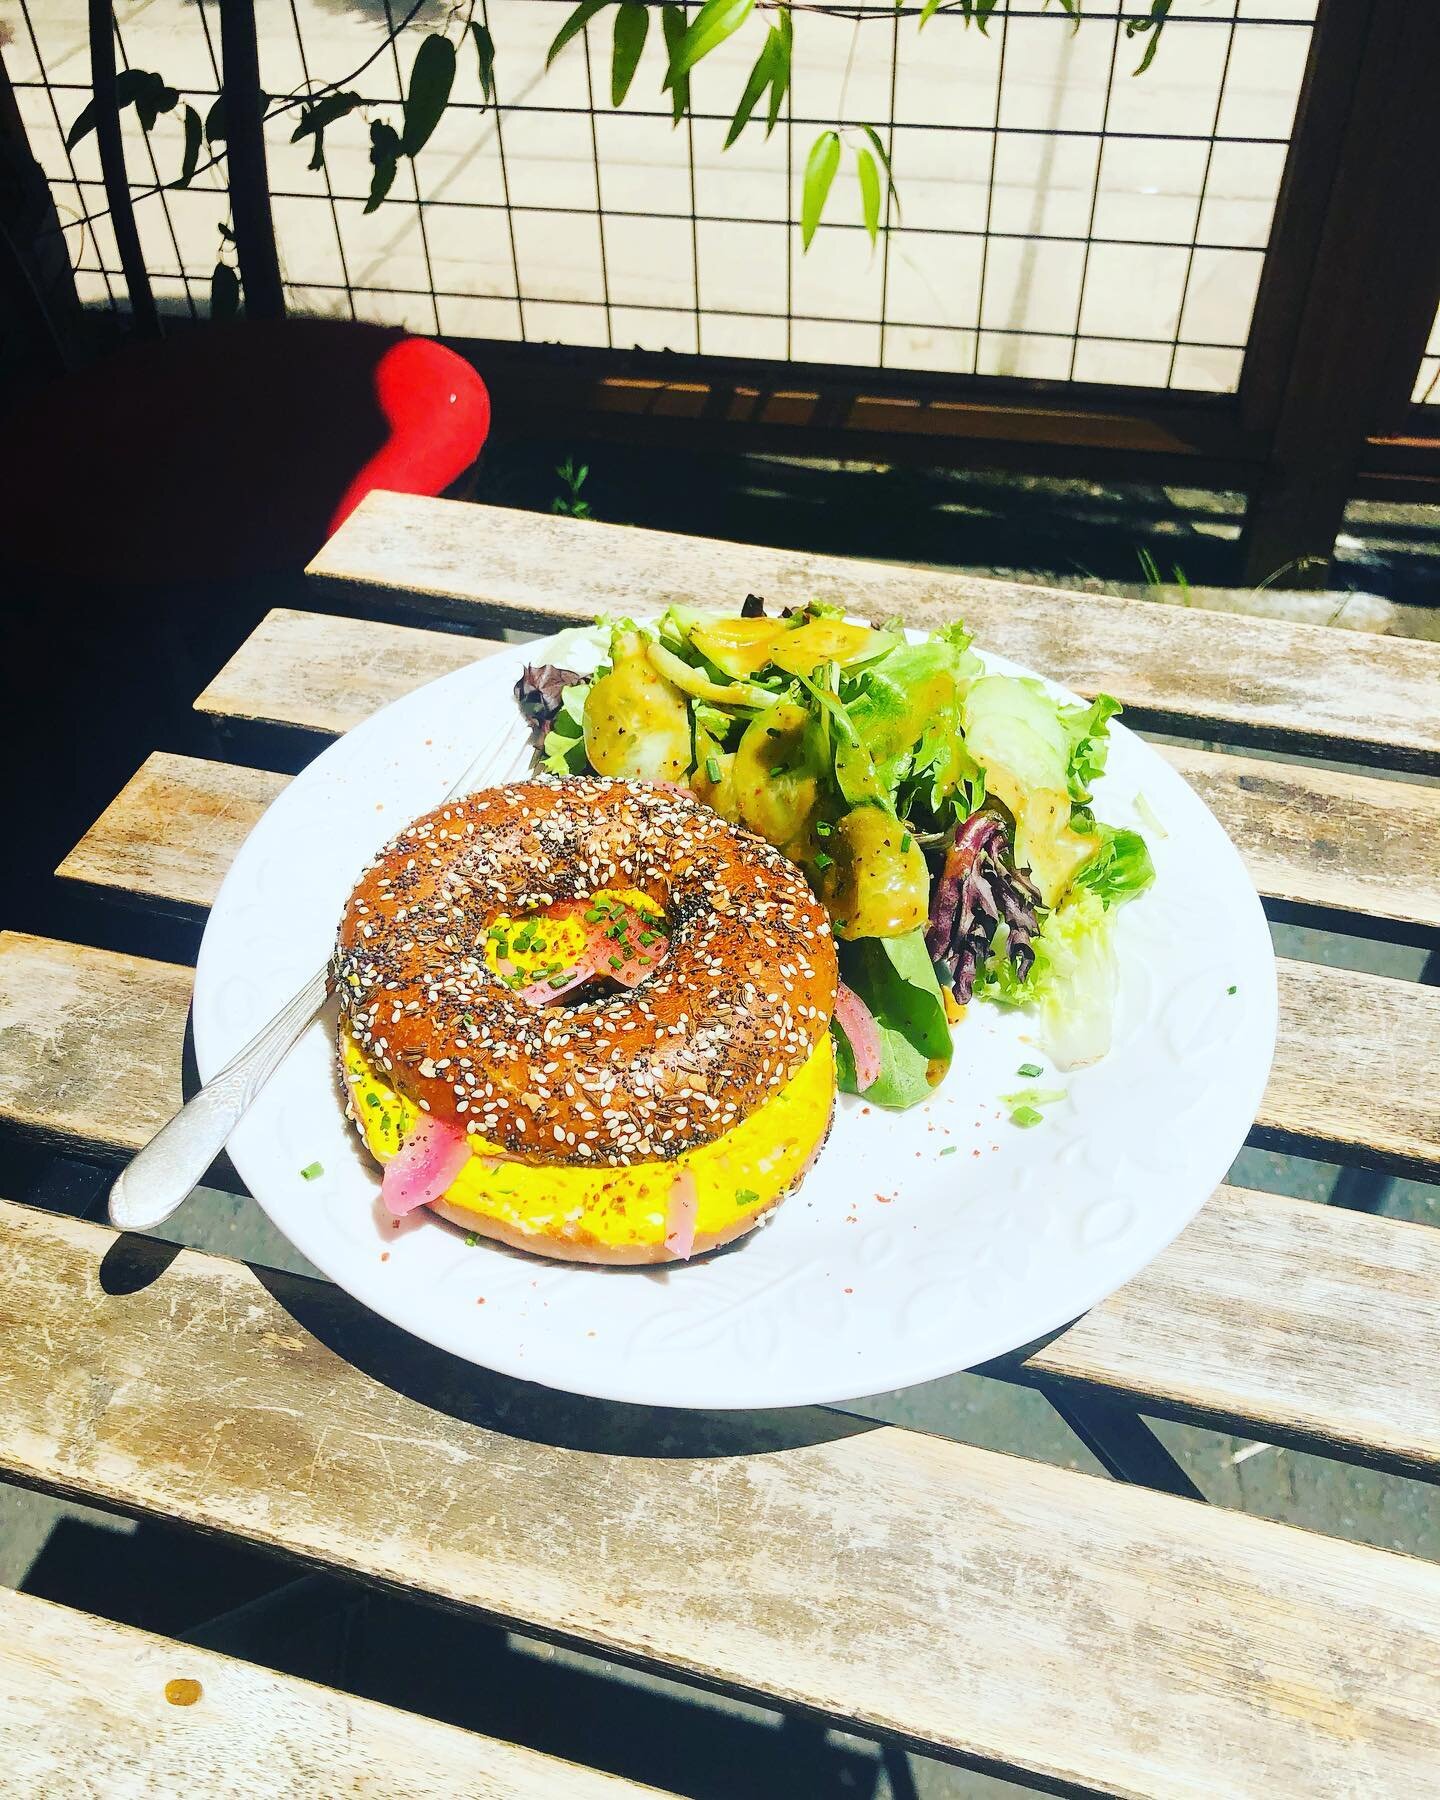 VEGGIE BAGEL SPECIAL!! Turmeric herb cream cheese with pickled red onions on one of our deeelicious everything pretzel bagels!! Come get one with an iced coffee or a nice cold beer on our hottest summer day so far!! 😎😎😎 - - 
#fressenpdx#pdxpretzel